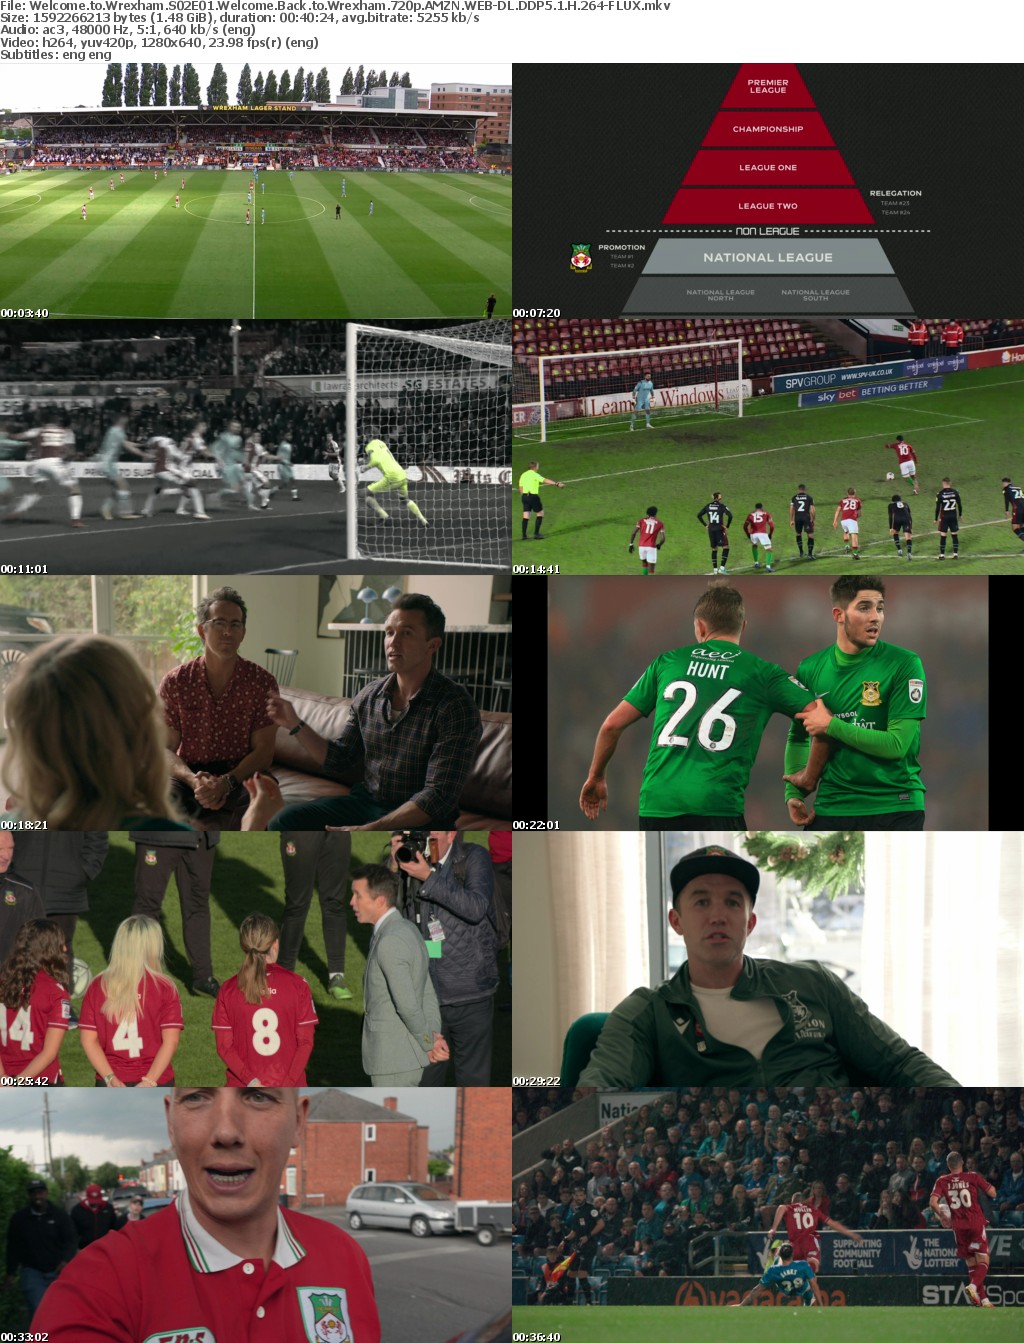 Welcome to Wrexham S02E01 Welcome Back to Wrexham 720p AMZN WEB-DL DDP5 1 H 264-FLUX